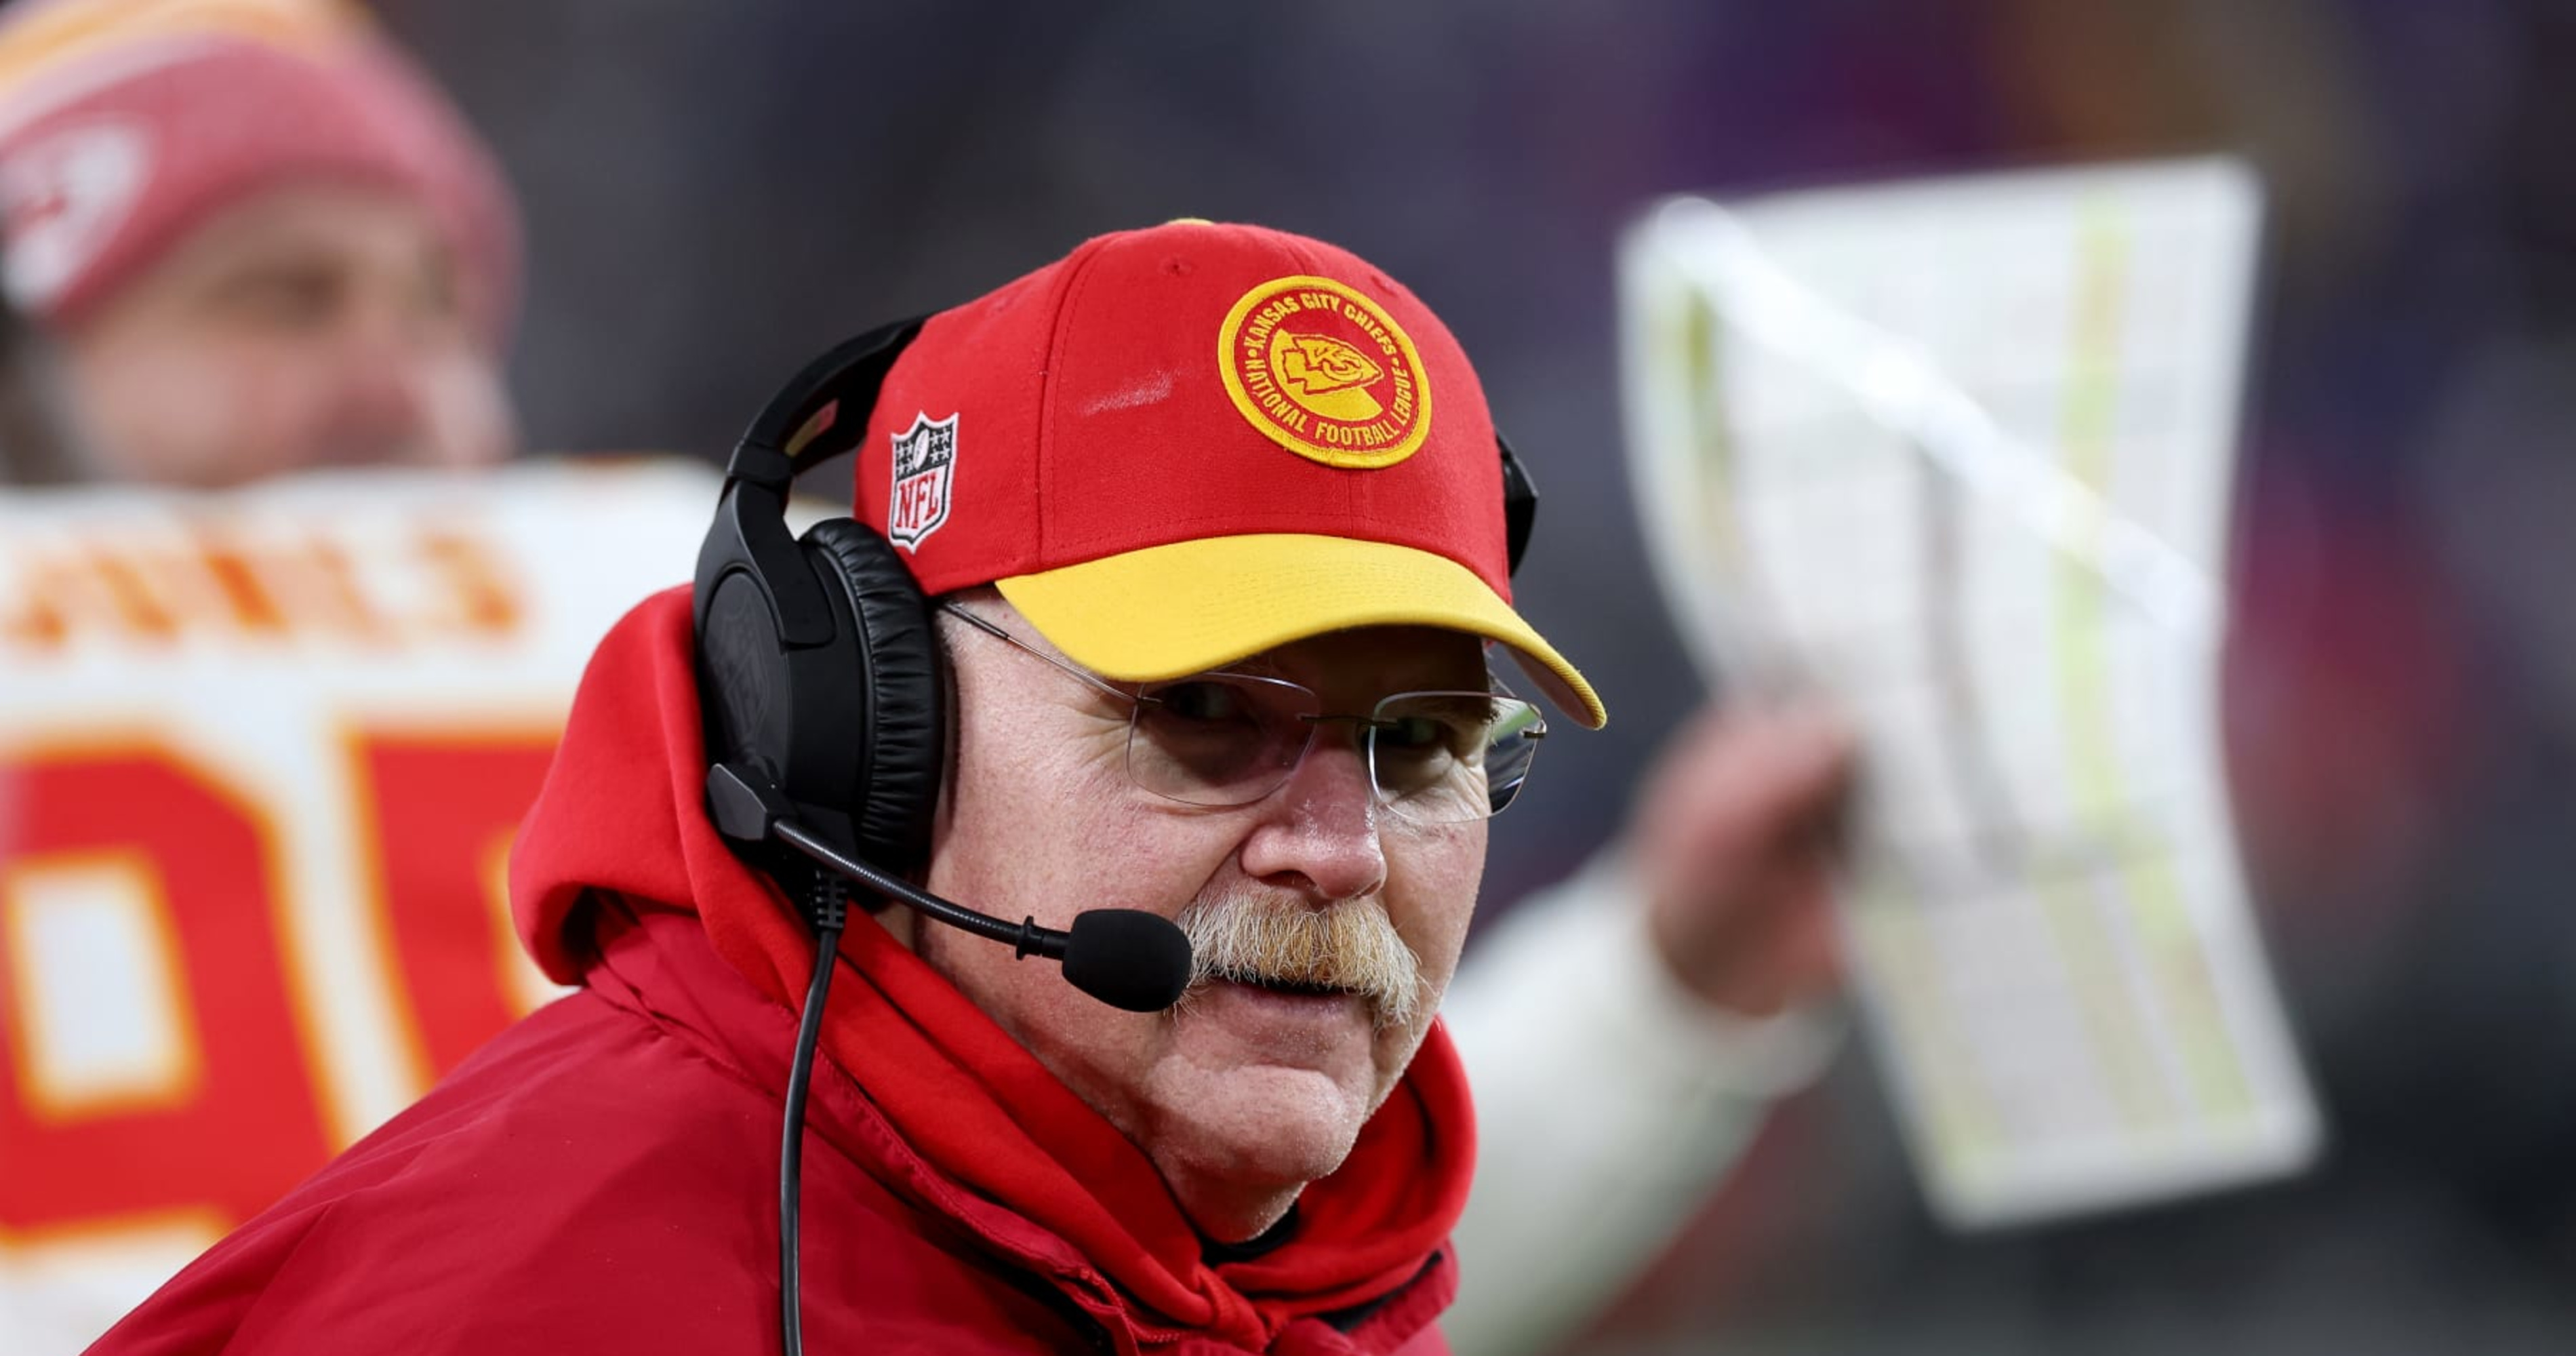 Video: Chiefs' Andy Reid Says He Ate 60 Burgers While Filming Commercial with Mahomes